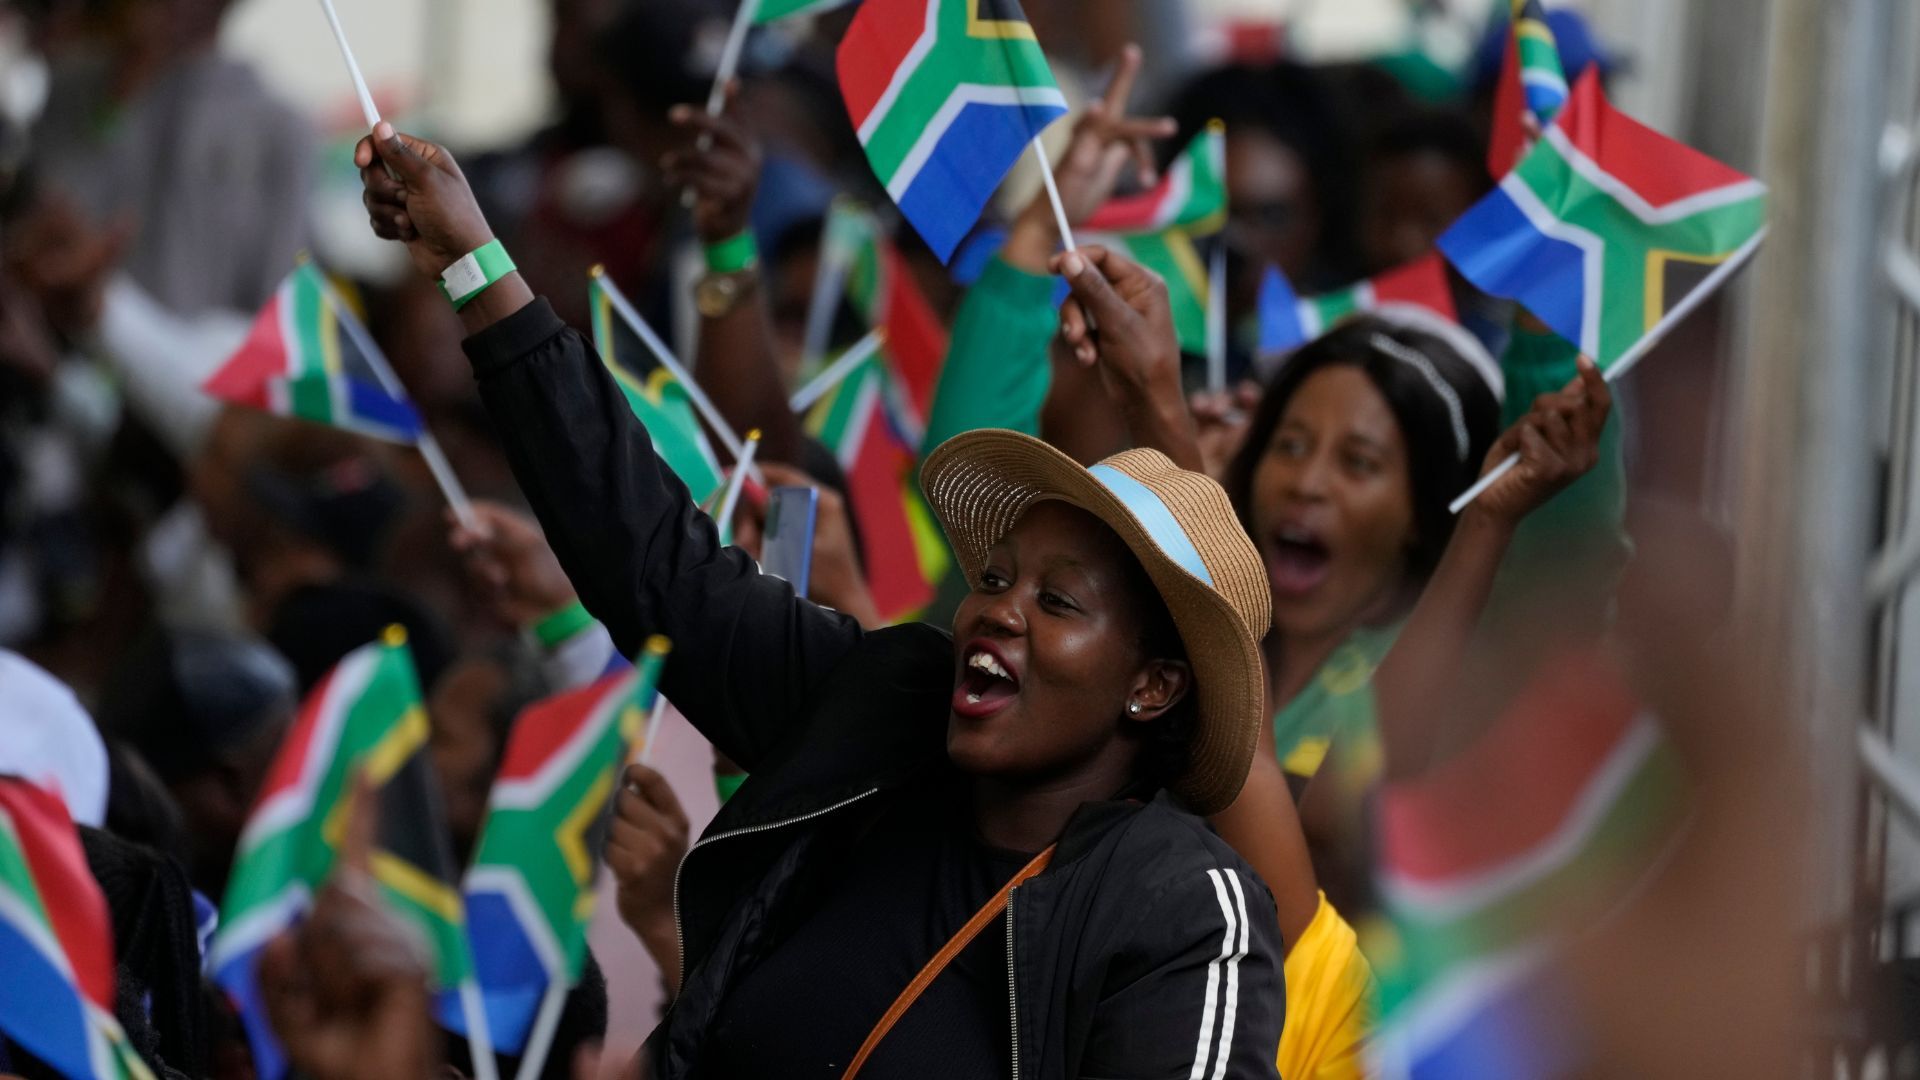 Has South Africas ANC failed to live up to its promises? | Politics [Video]